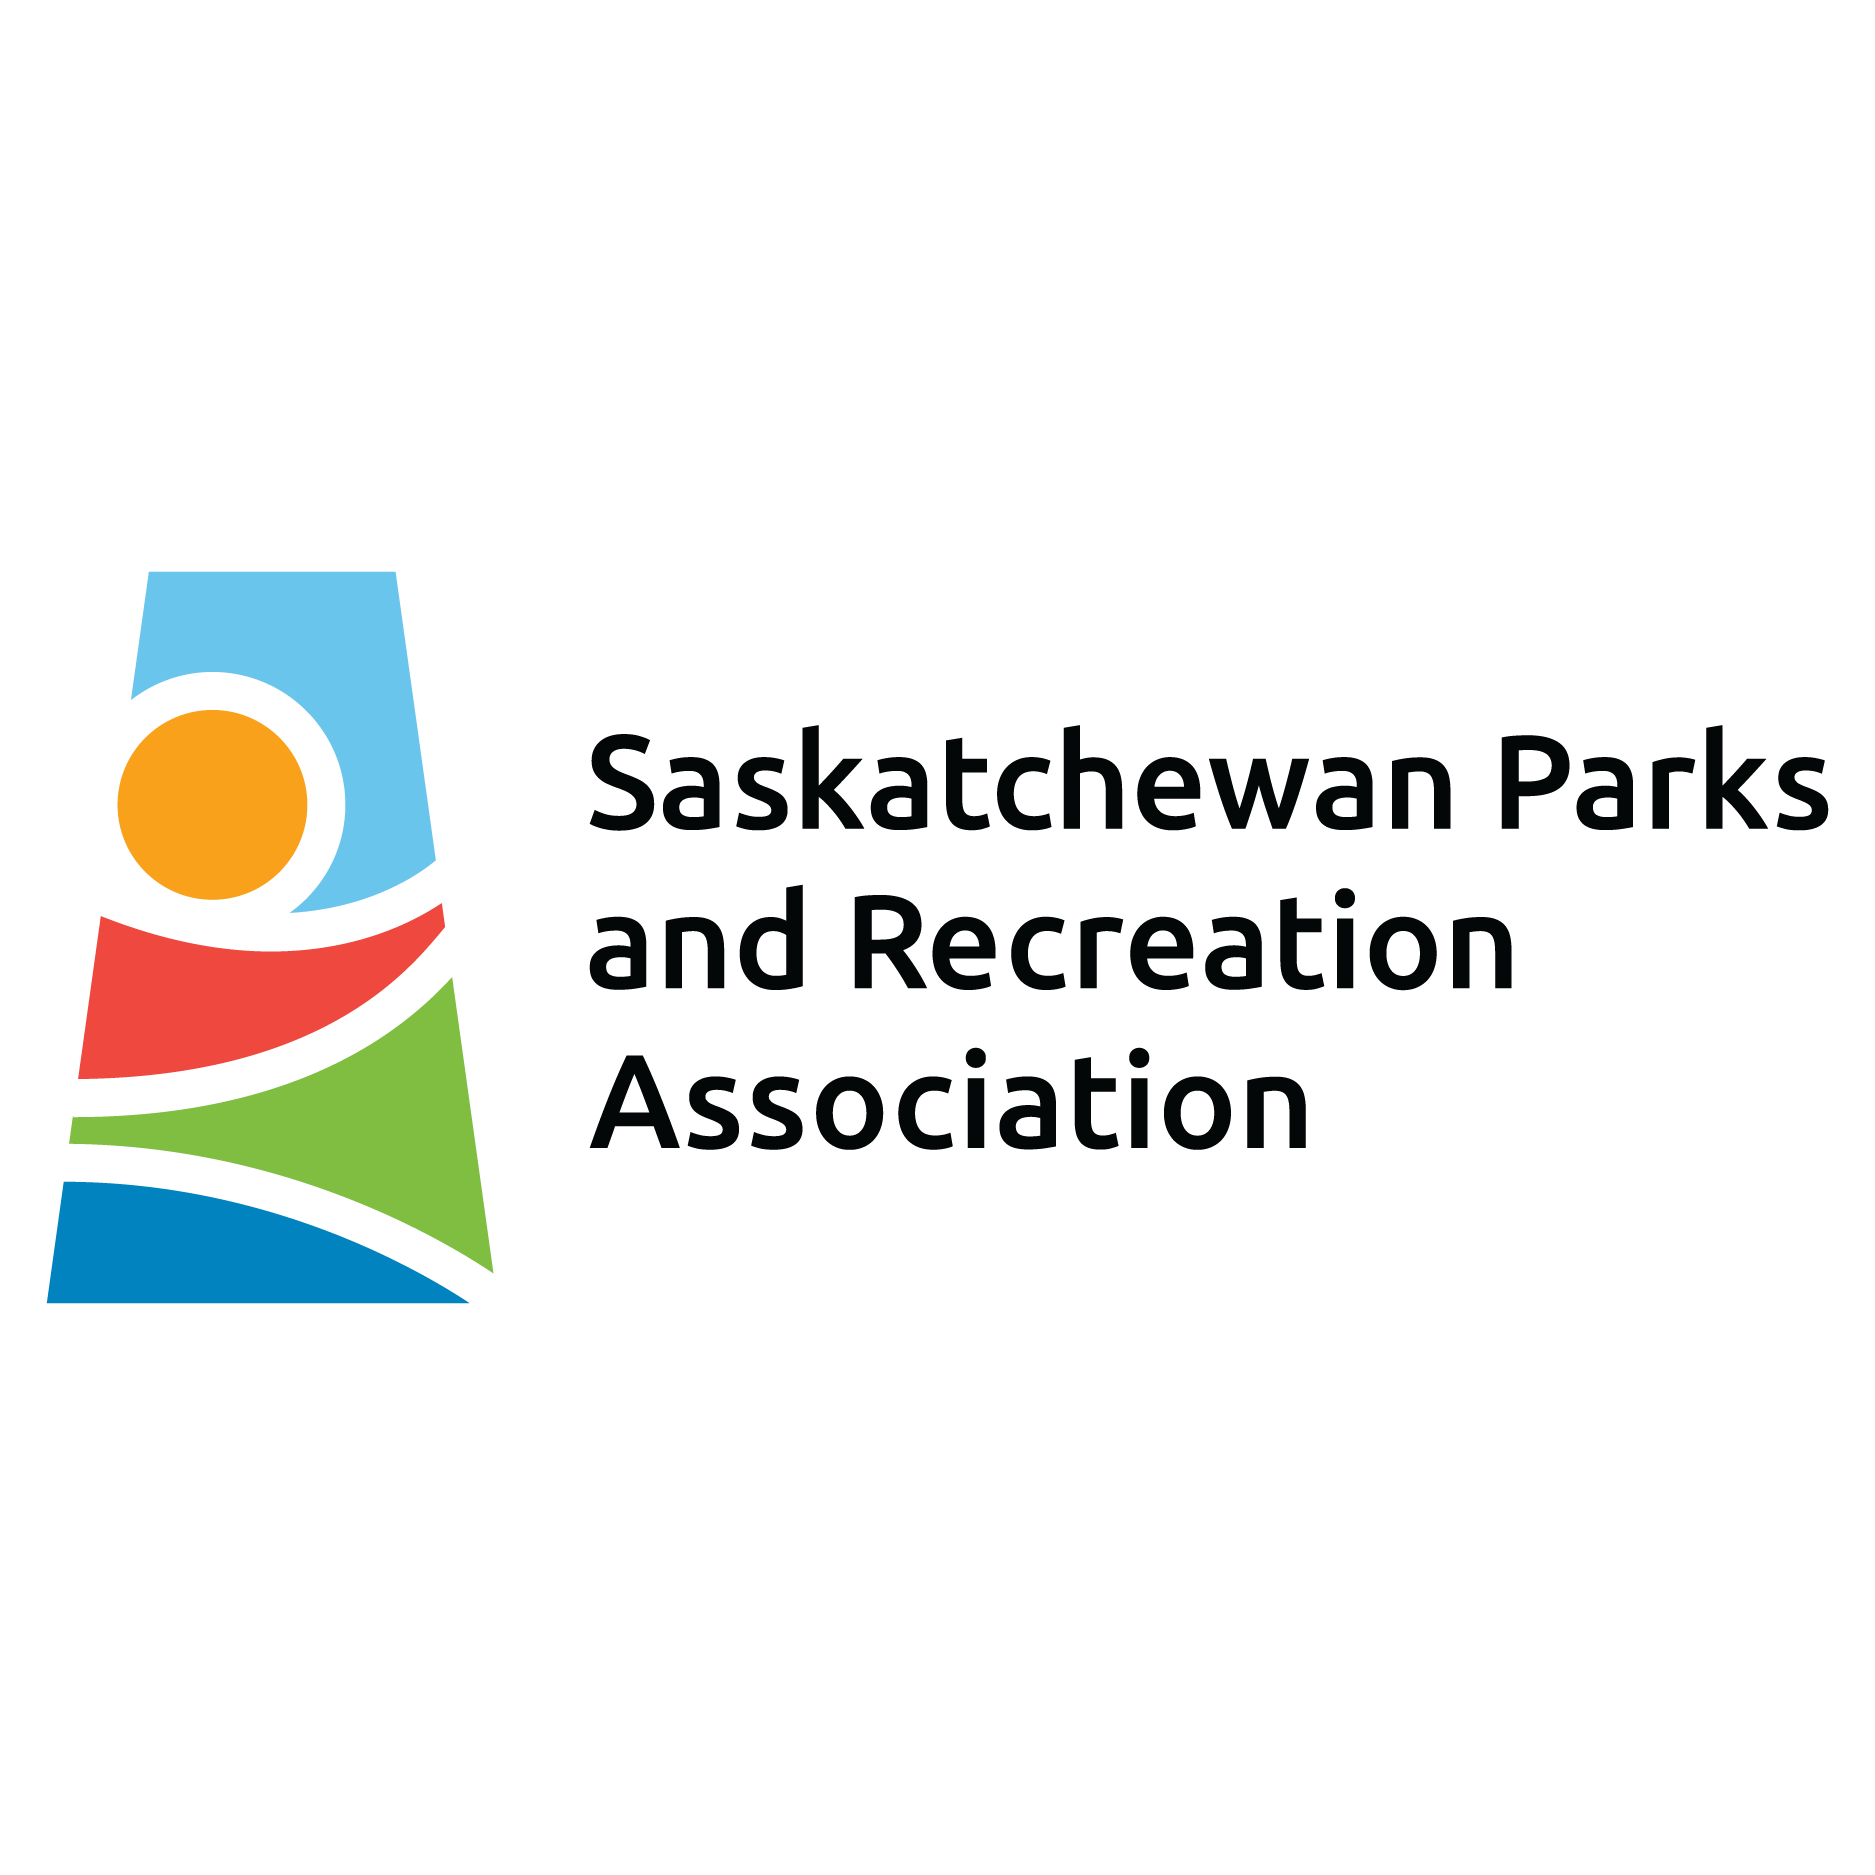 The Saskatchewan Parks and Recreation Association logo featuring a shape of the province filled in with various colours and designs.